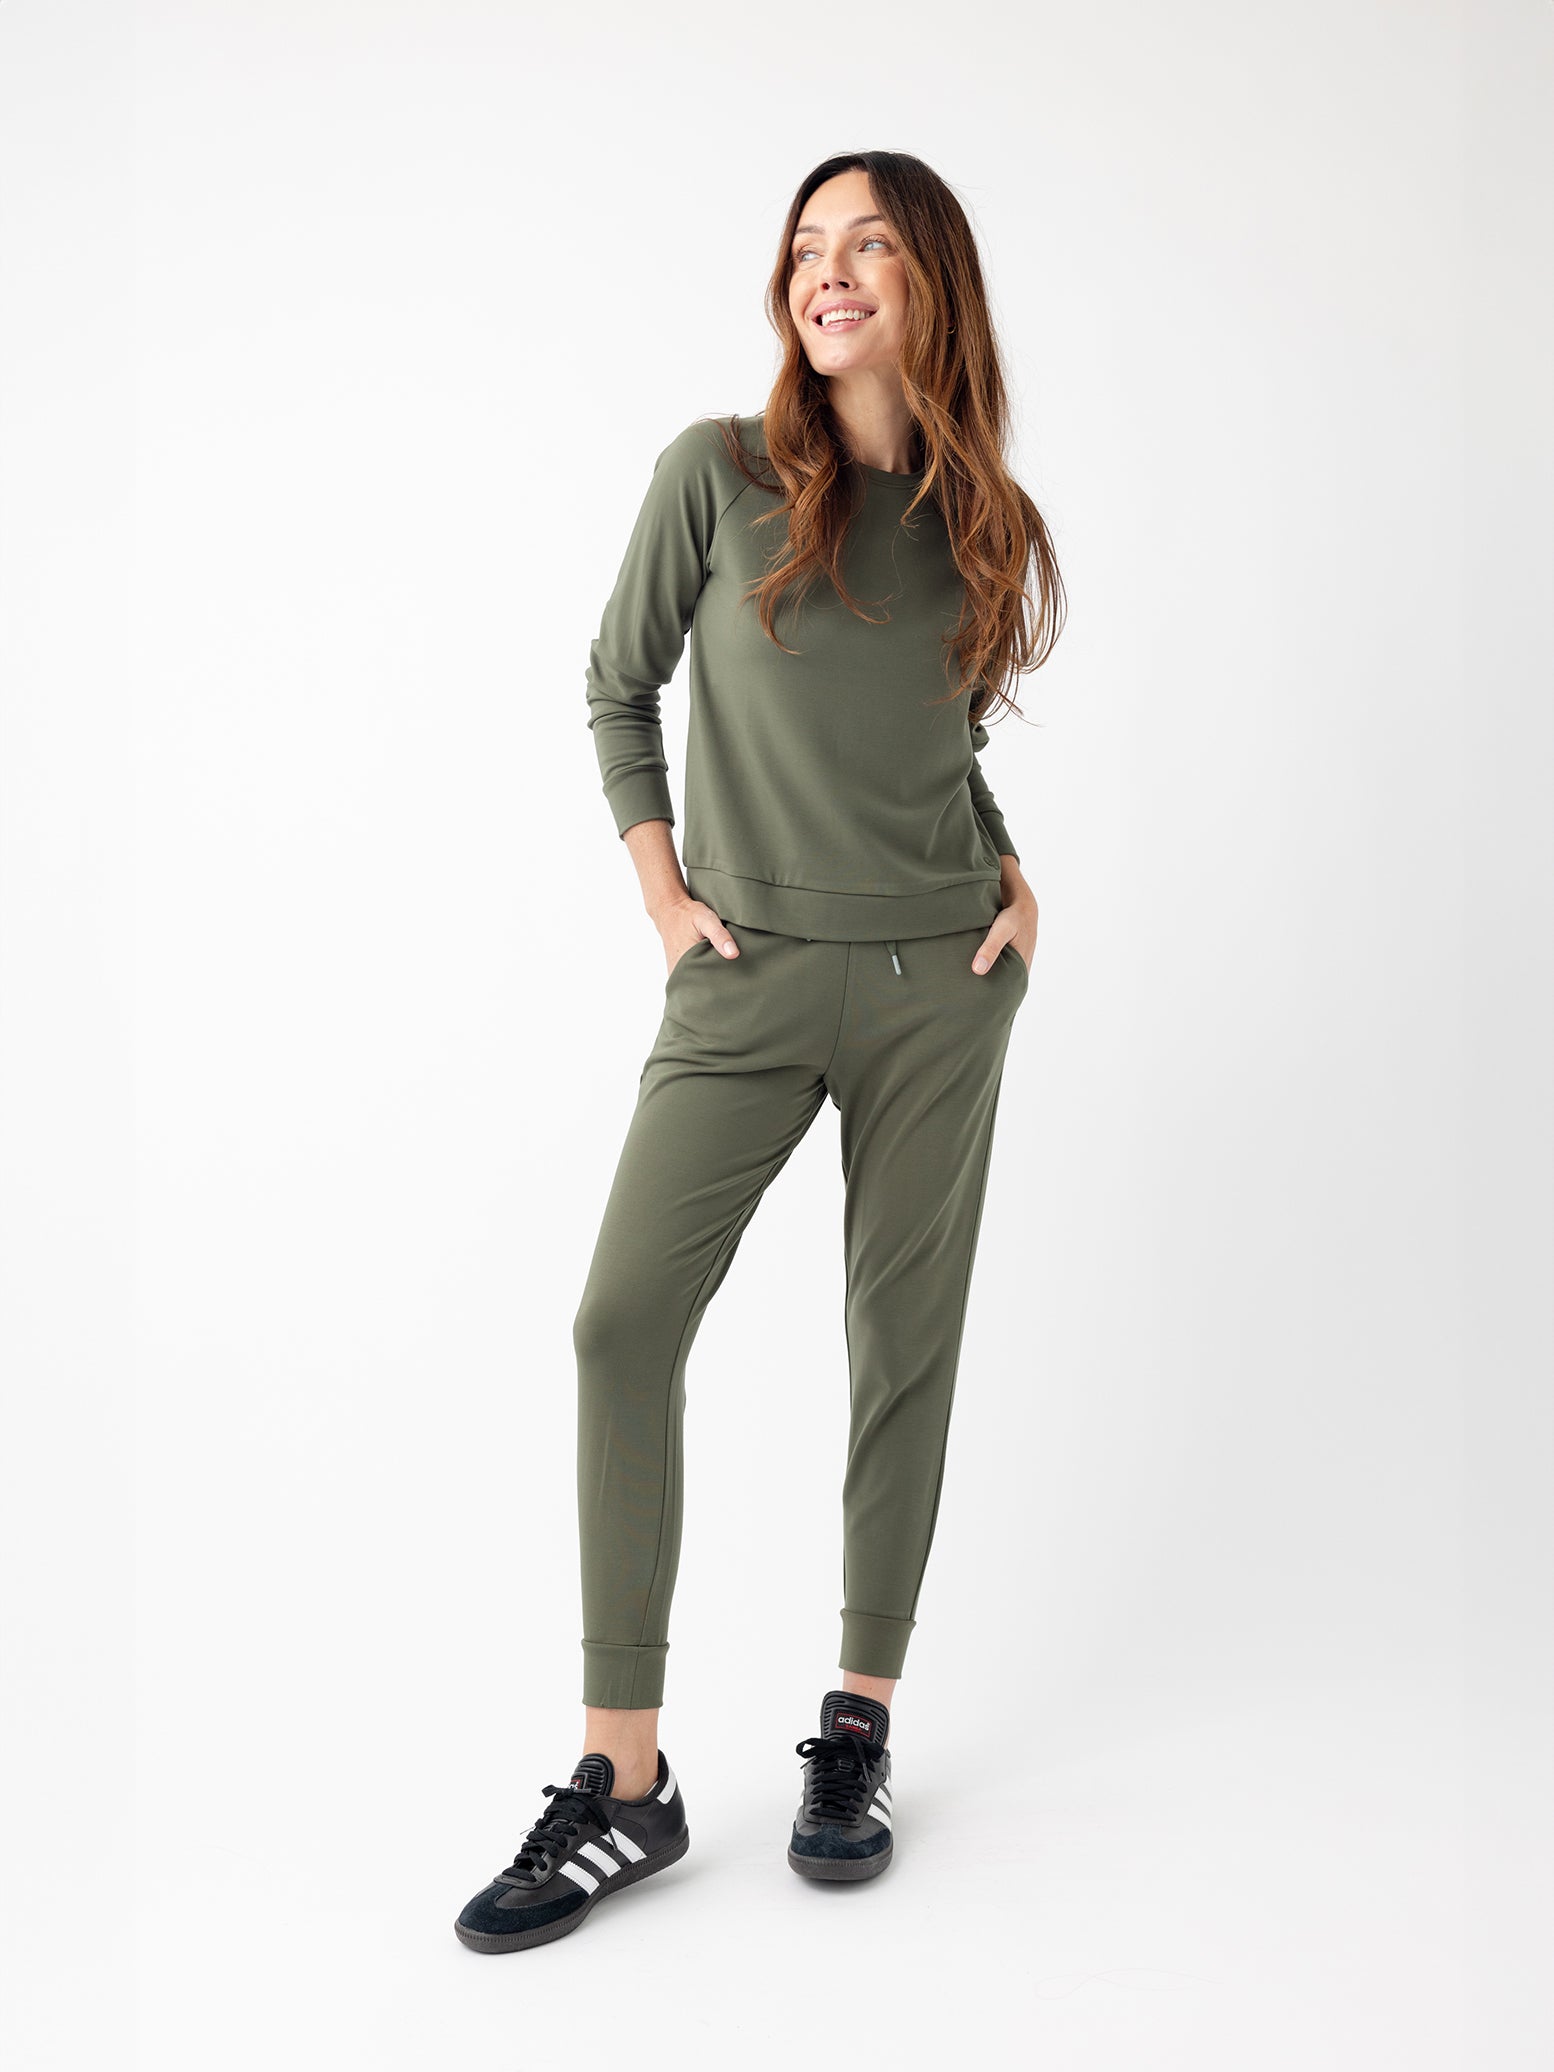 Woman in olive jogger set with white background |Color:Olive